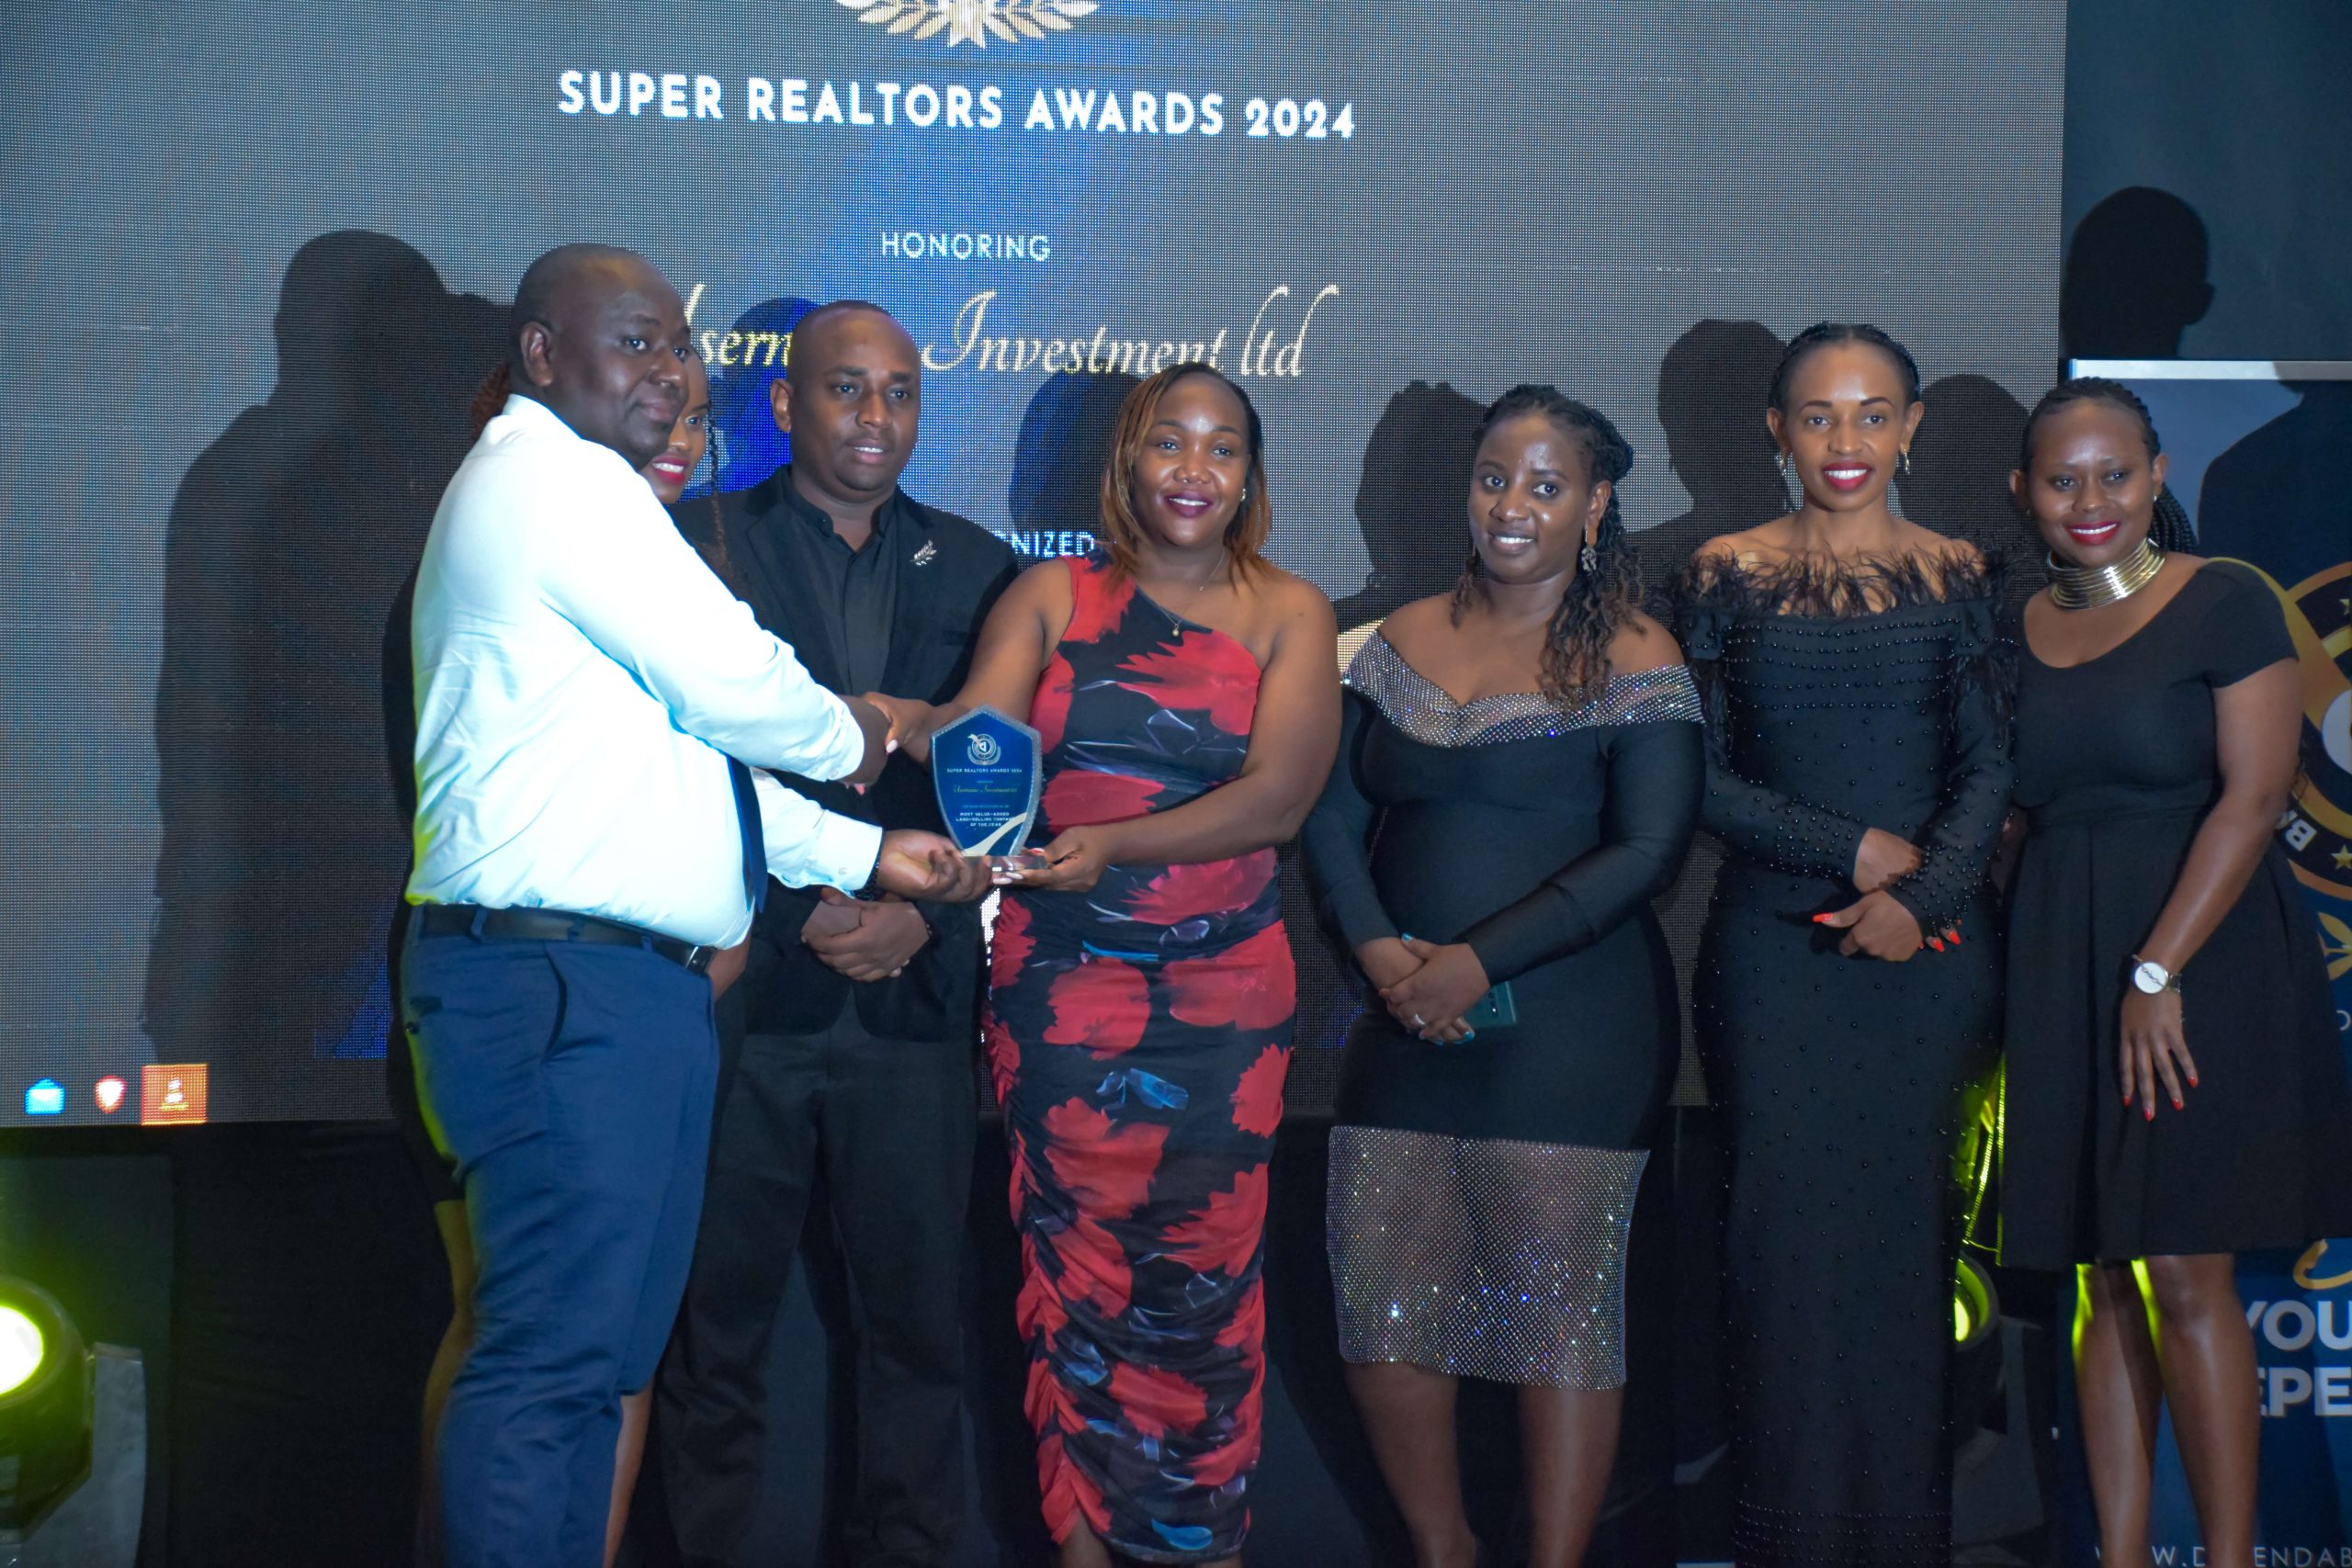 Username Investments Ltd Bags Two Awards 2024